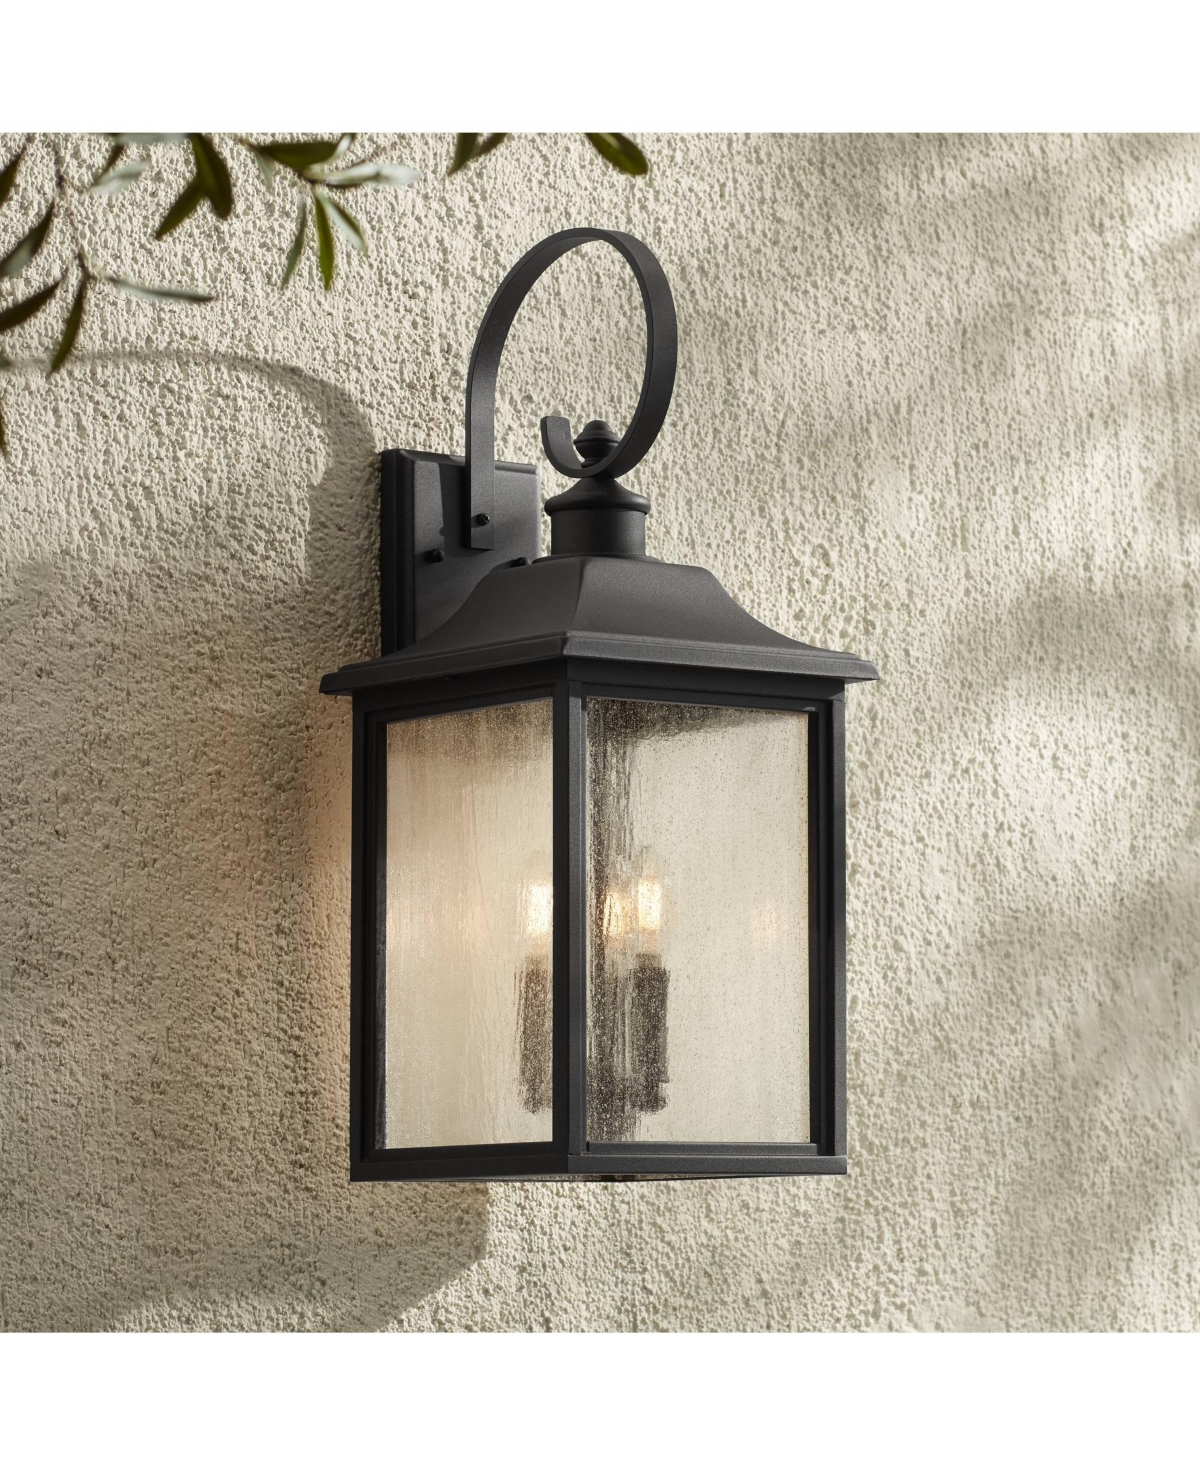 Moray Bay Industrial Outdoor Wall Light Fixture Black Metal 24" Clear Seedy Glass Lantern Scroll Arm for Exterior House Porch Patio Outside Deck Garag